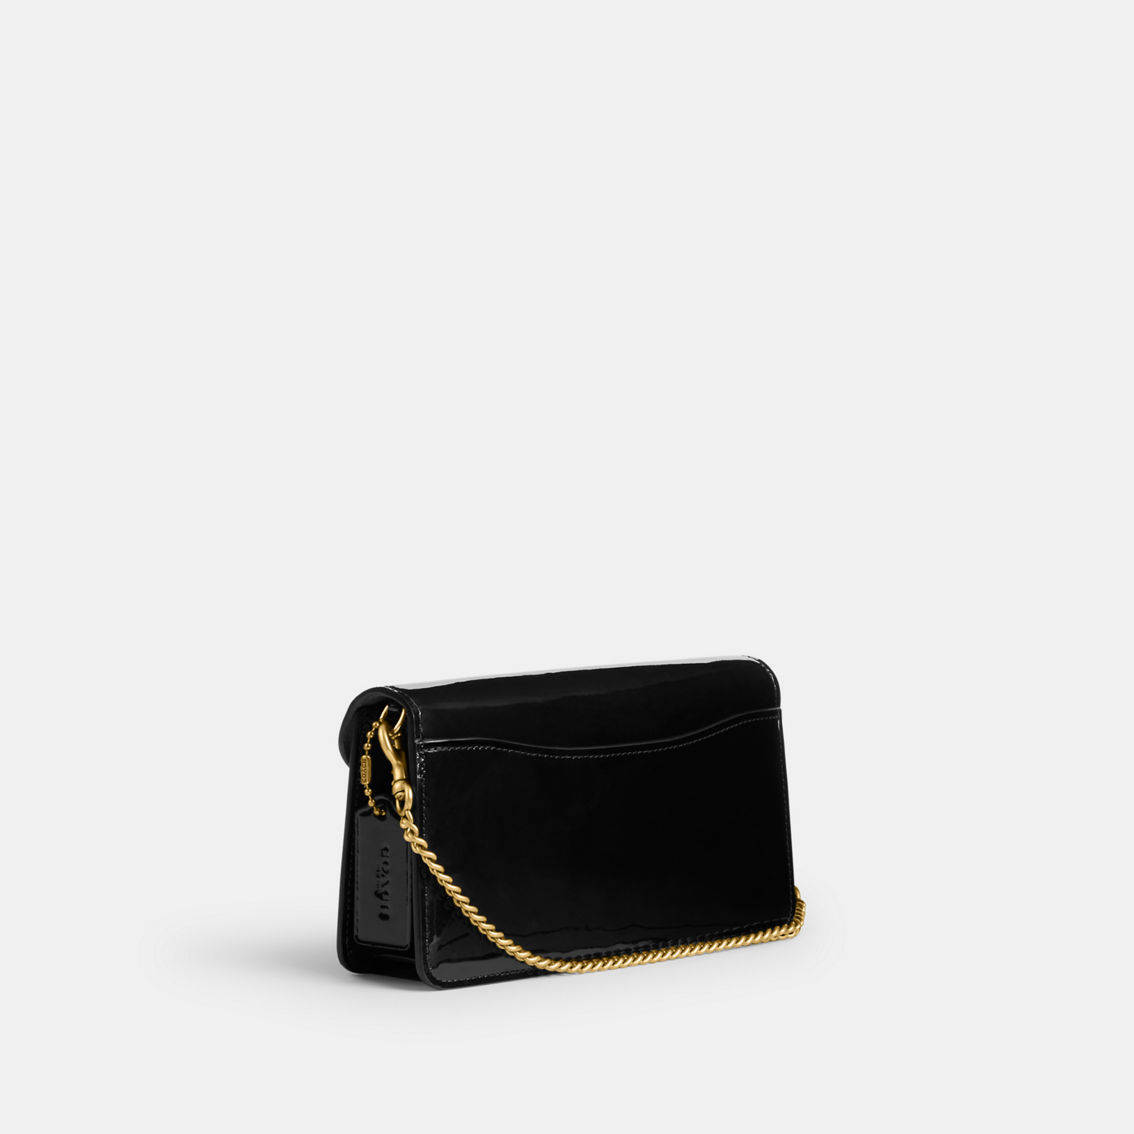 Coach Patent Signature Leather Tabby Chain Clutch - Image 2 of 3